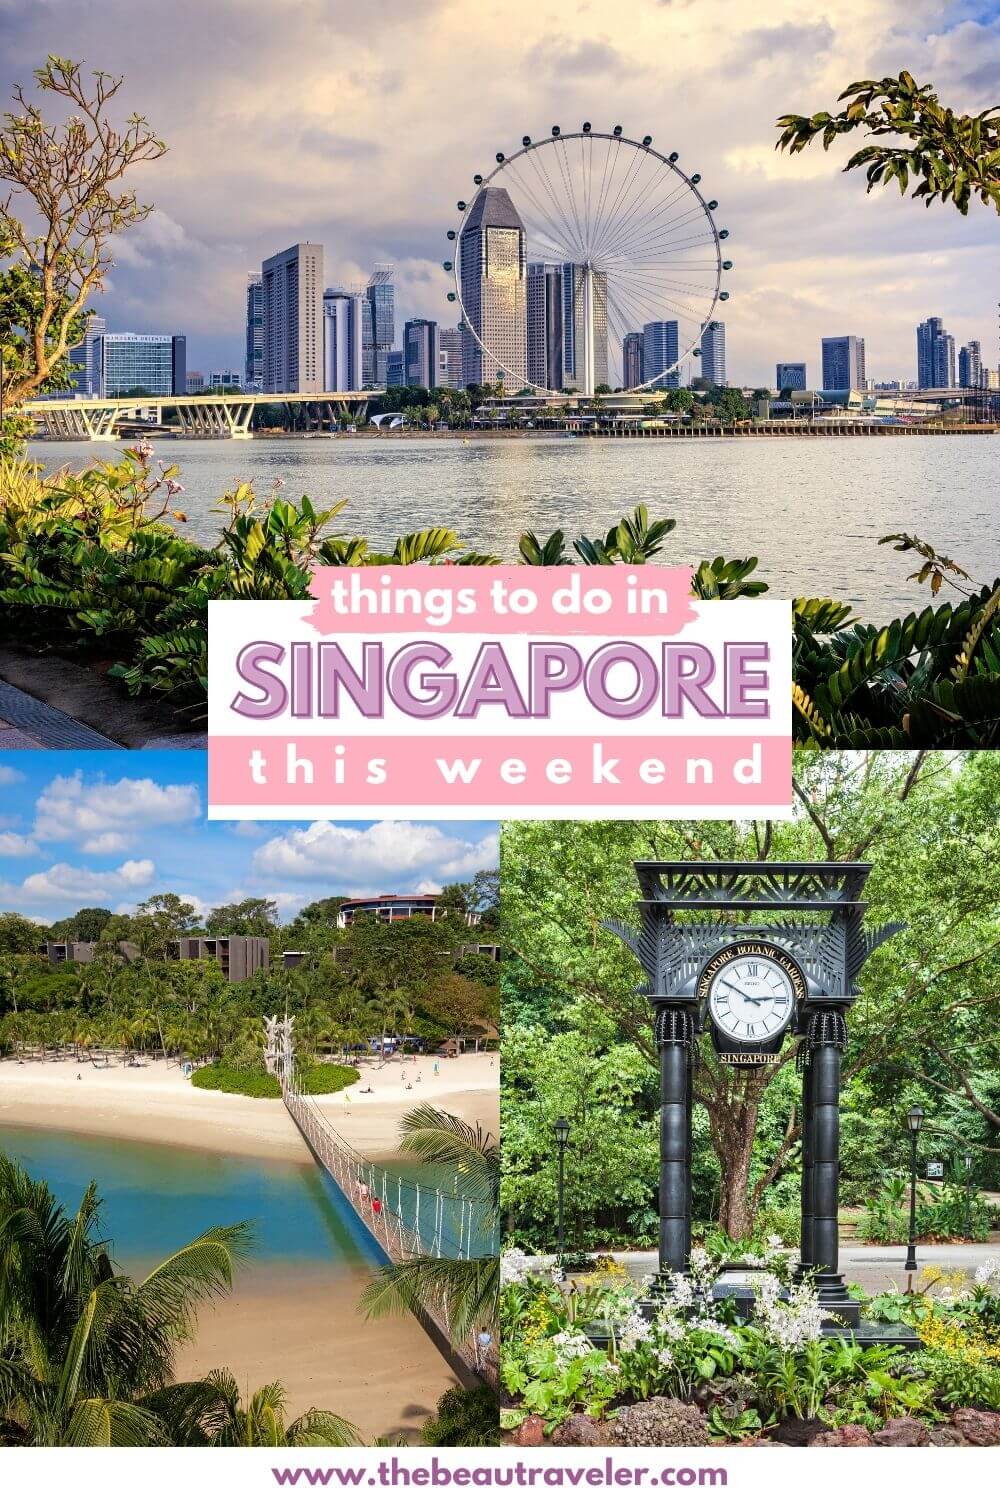 Things to Do in Singapore This Weekend - The BeauTraveler